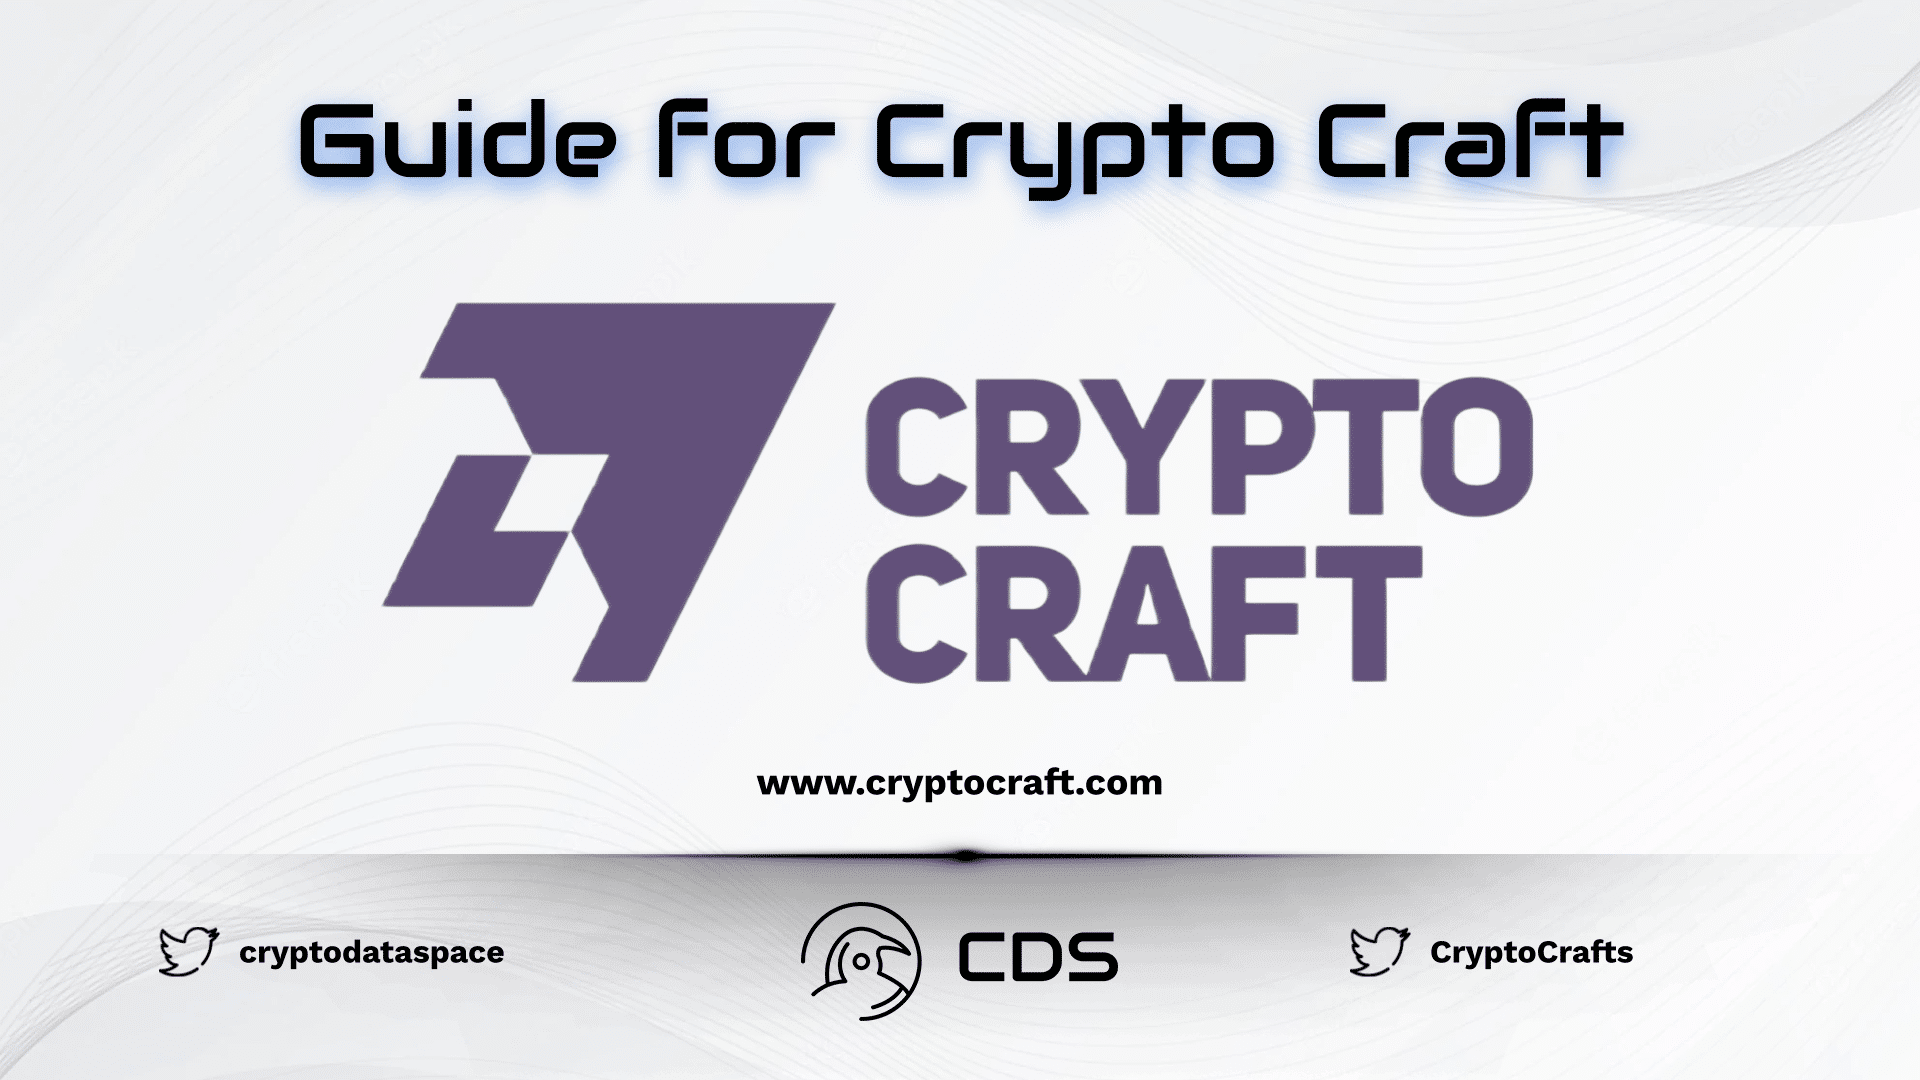 Guide for Crypto Craft